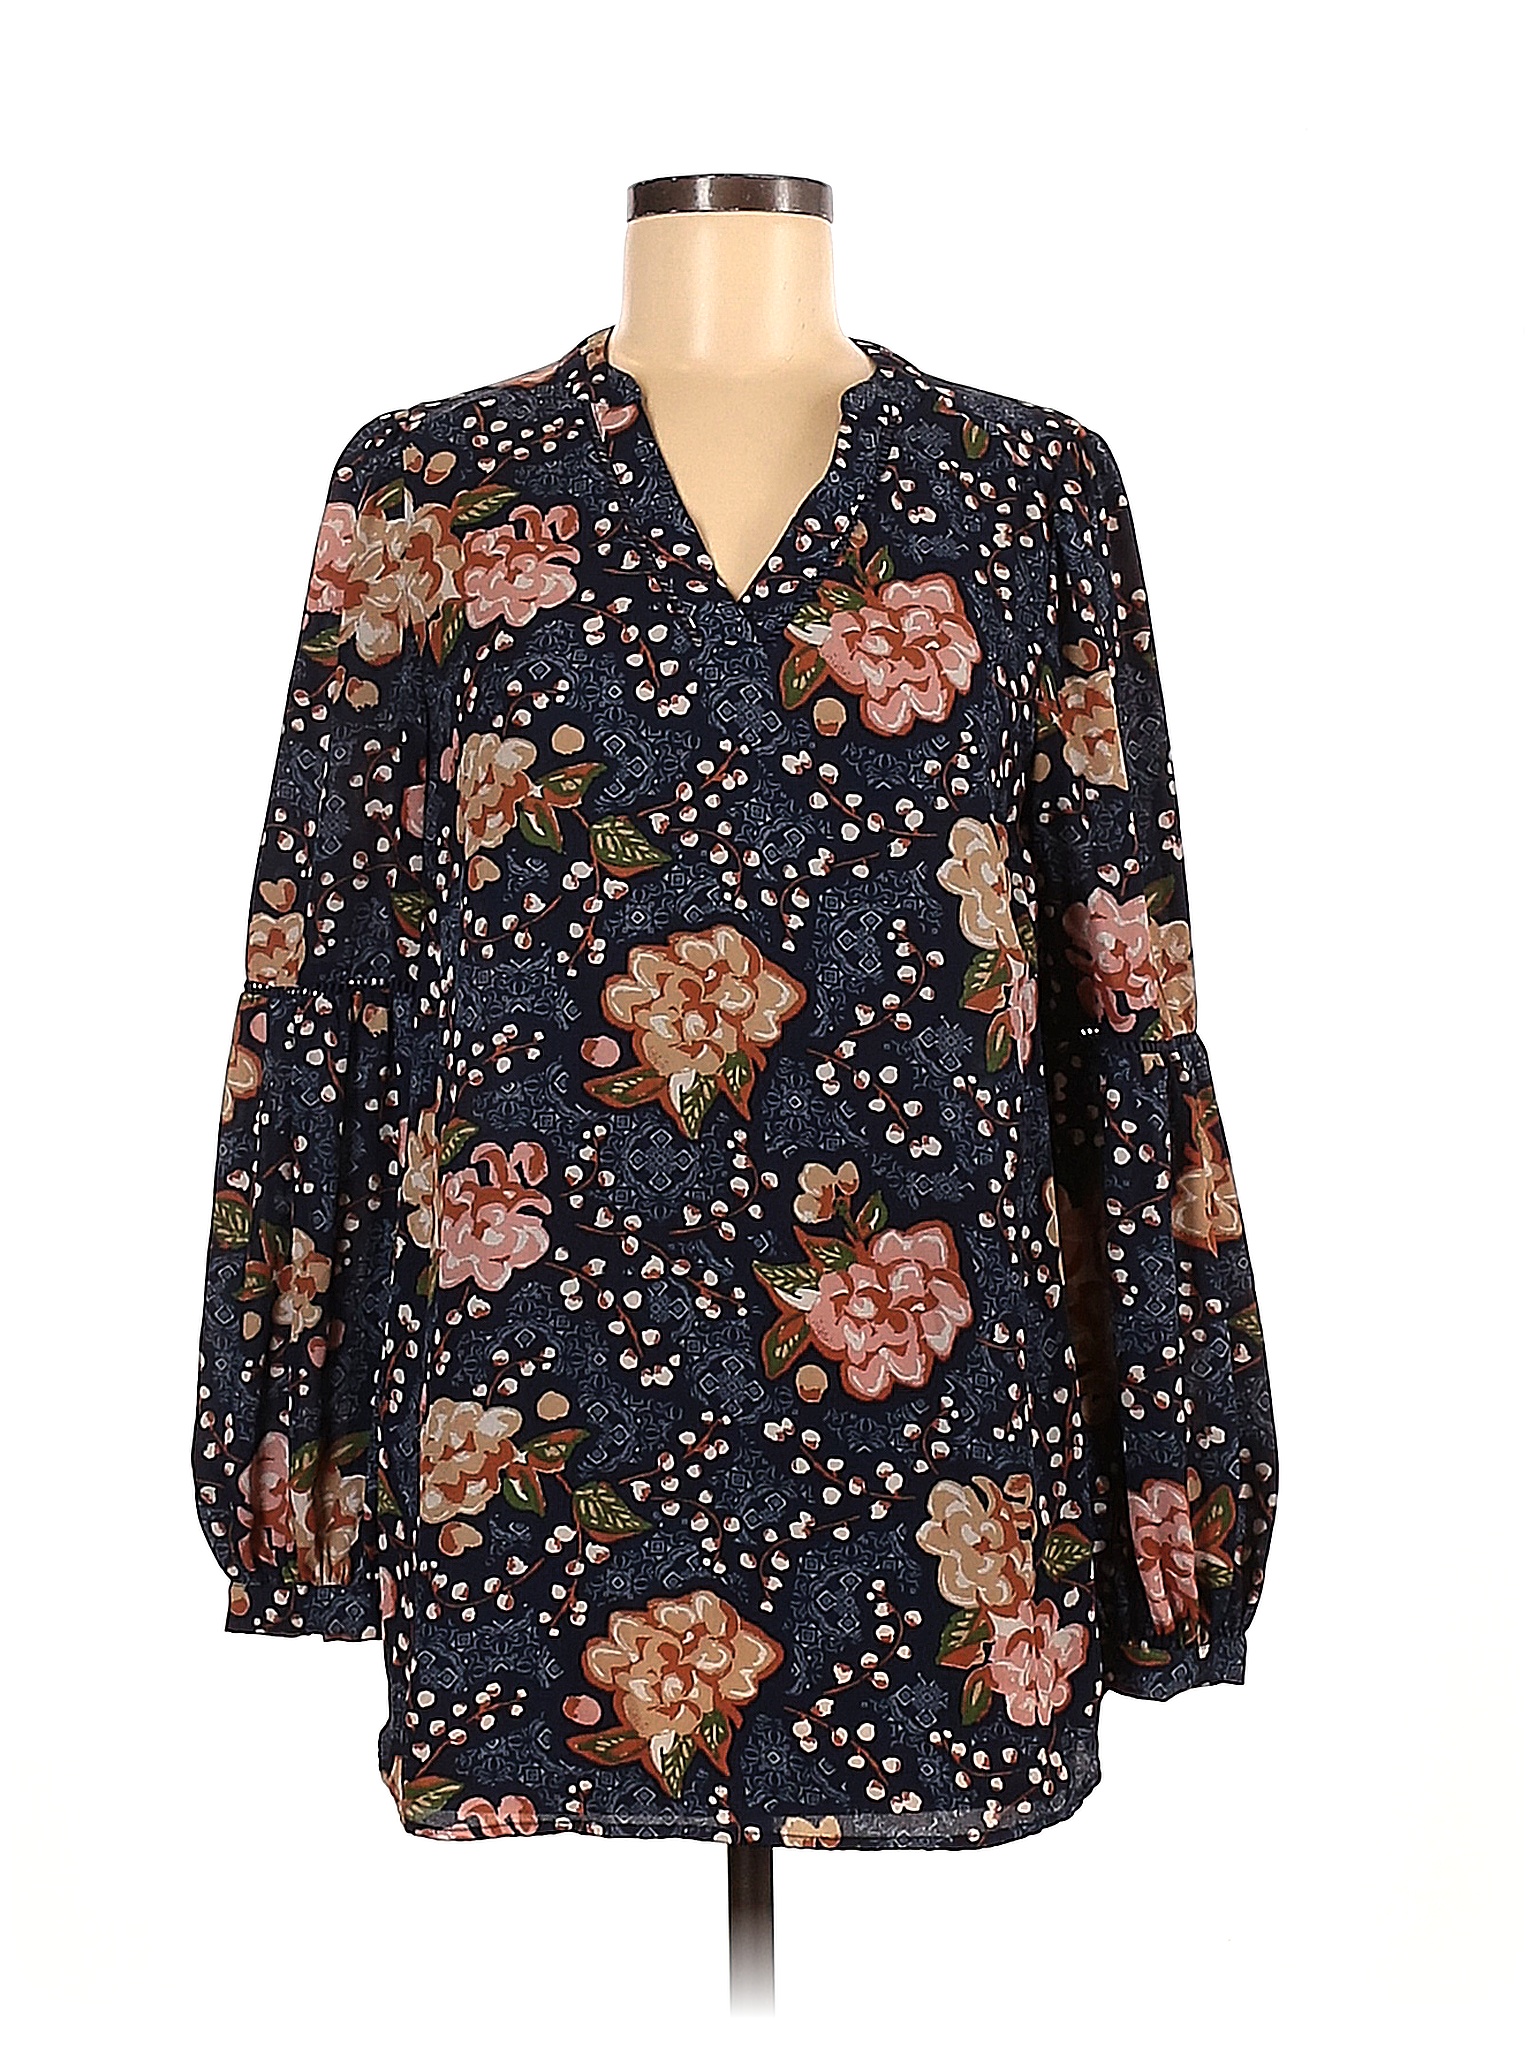 Octavia 100% Polyester Floral Blue Long Sleeve Blouse Size S - 86% off ...